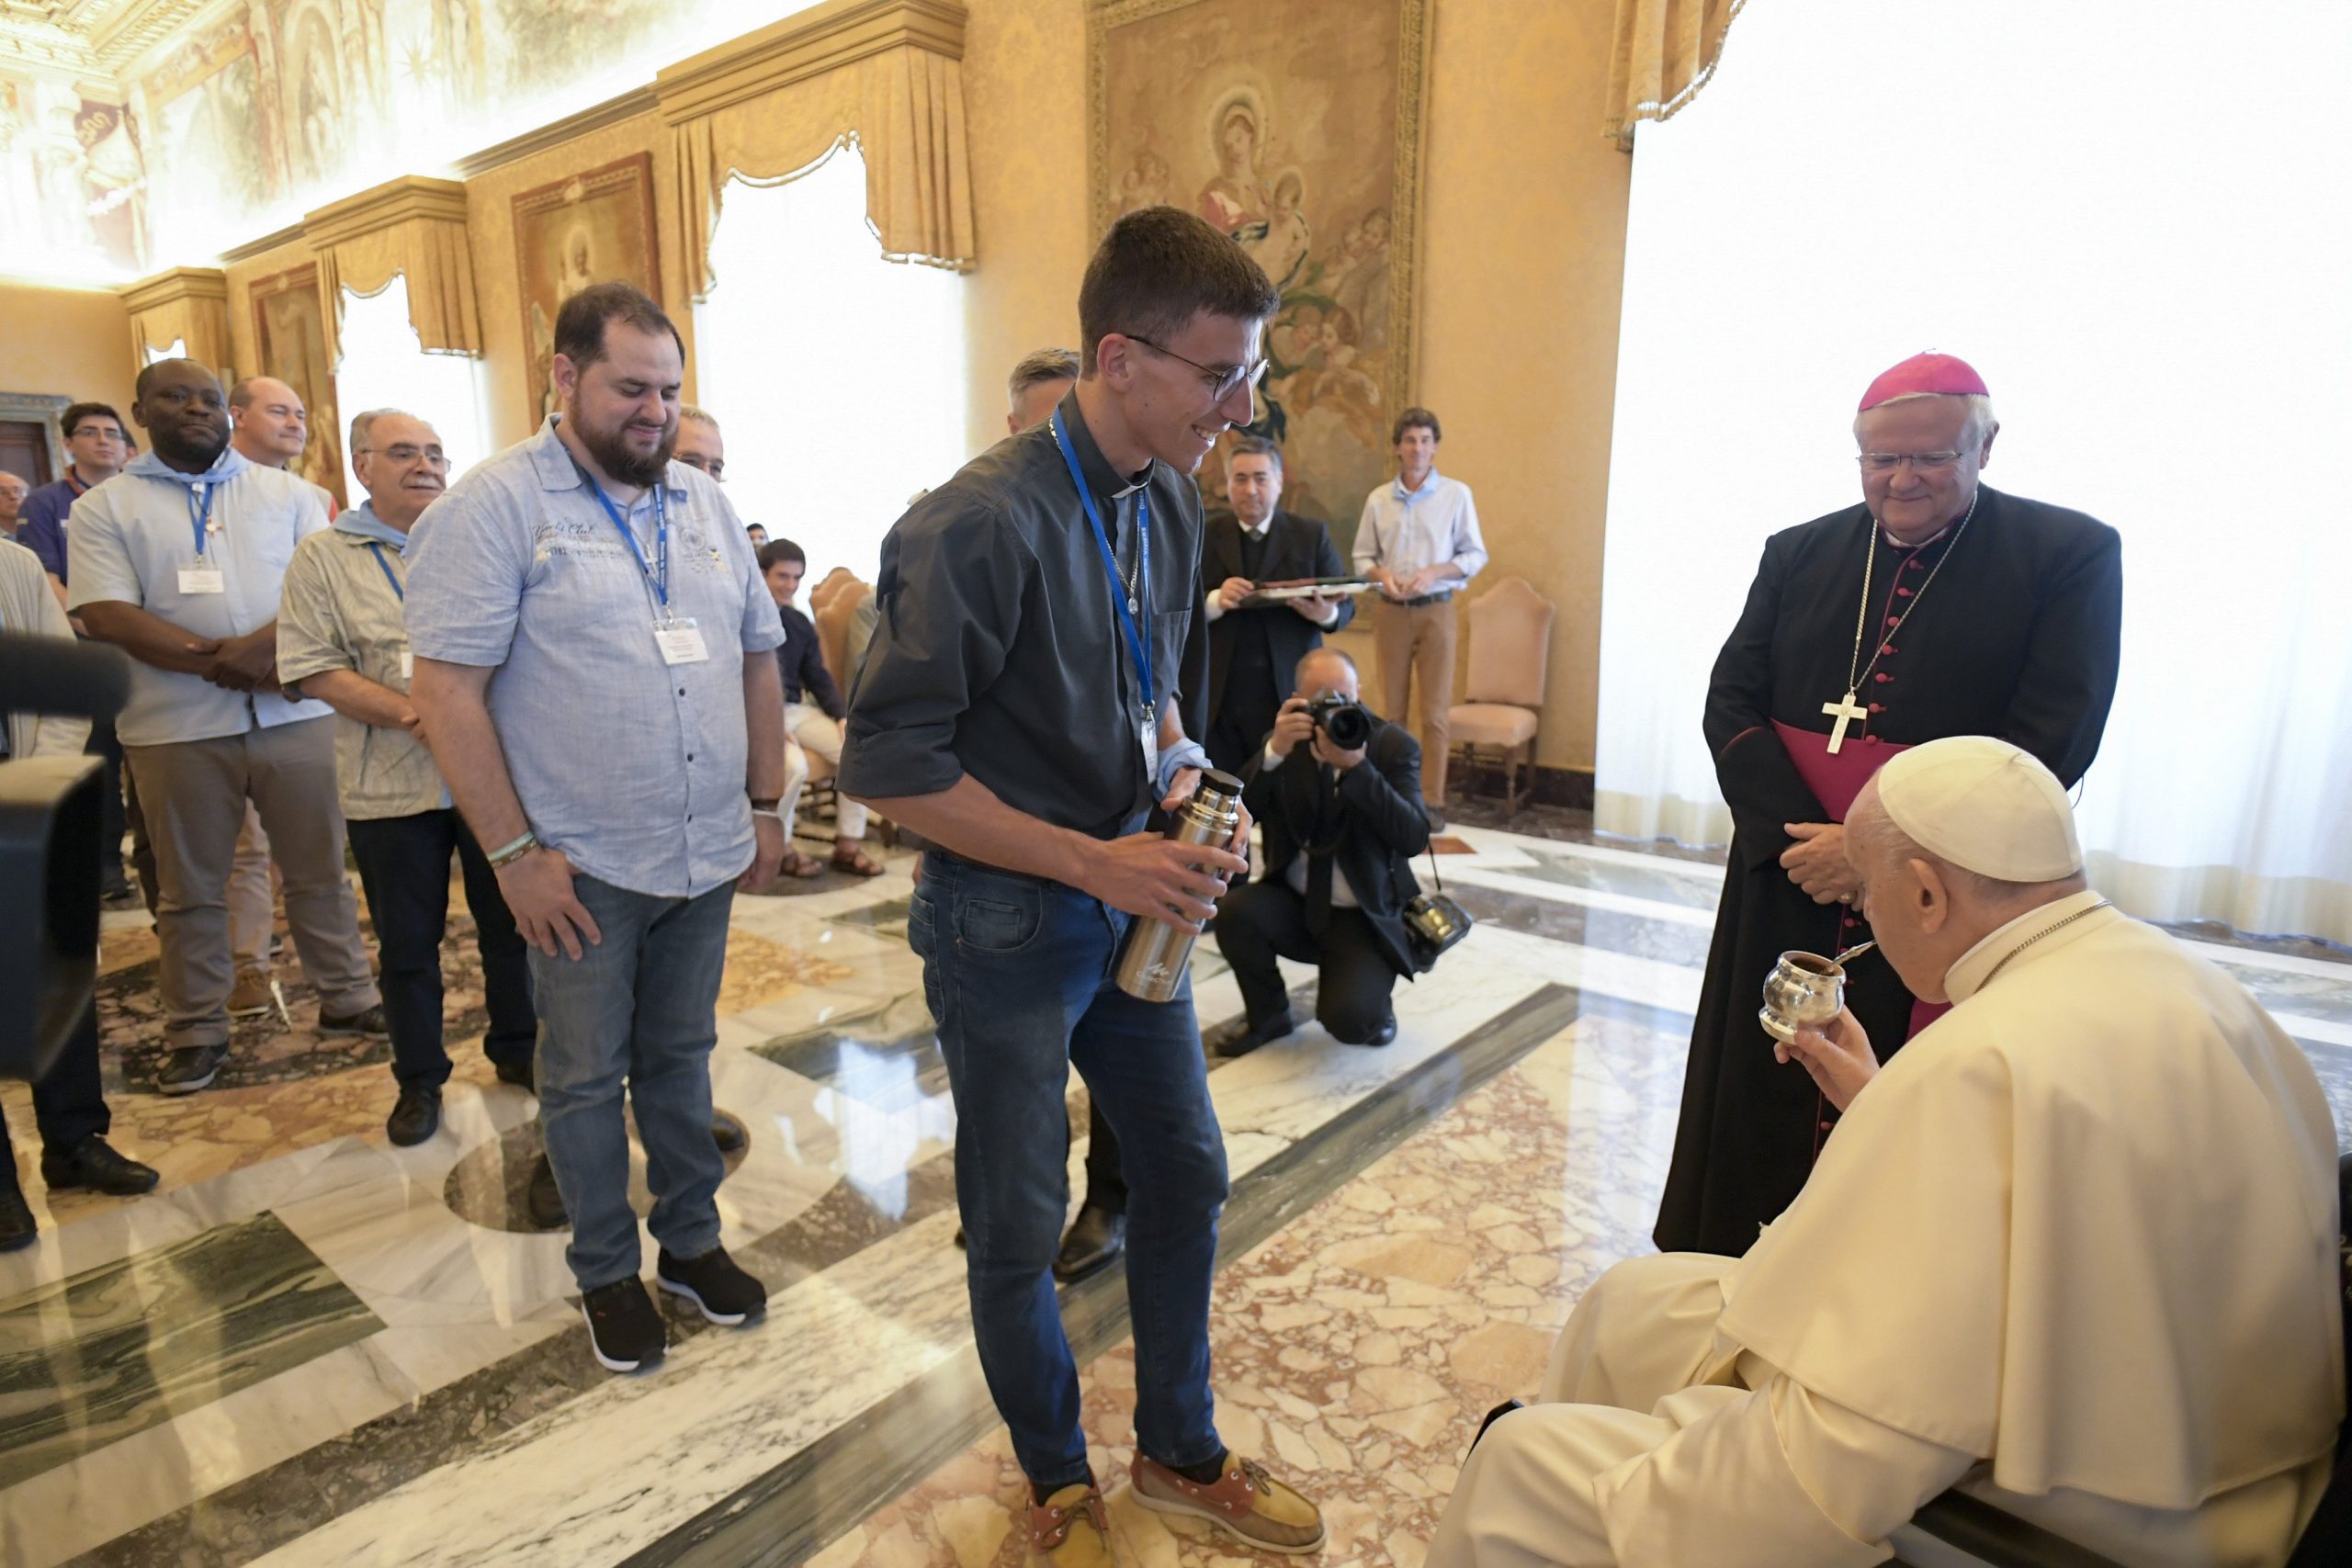 Learn from new saints, pope tells French young people